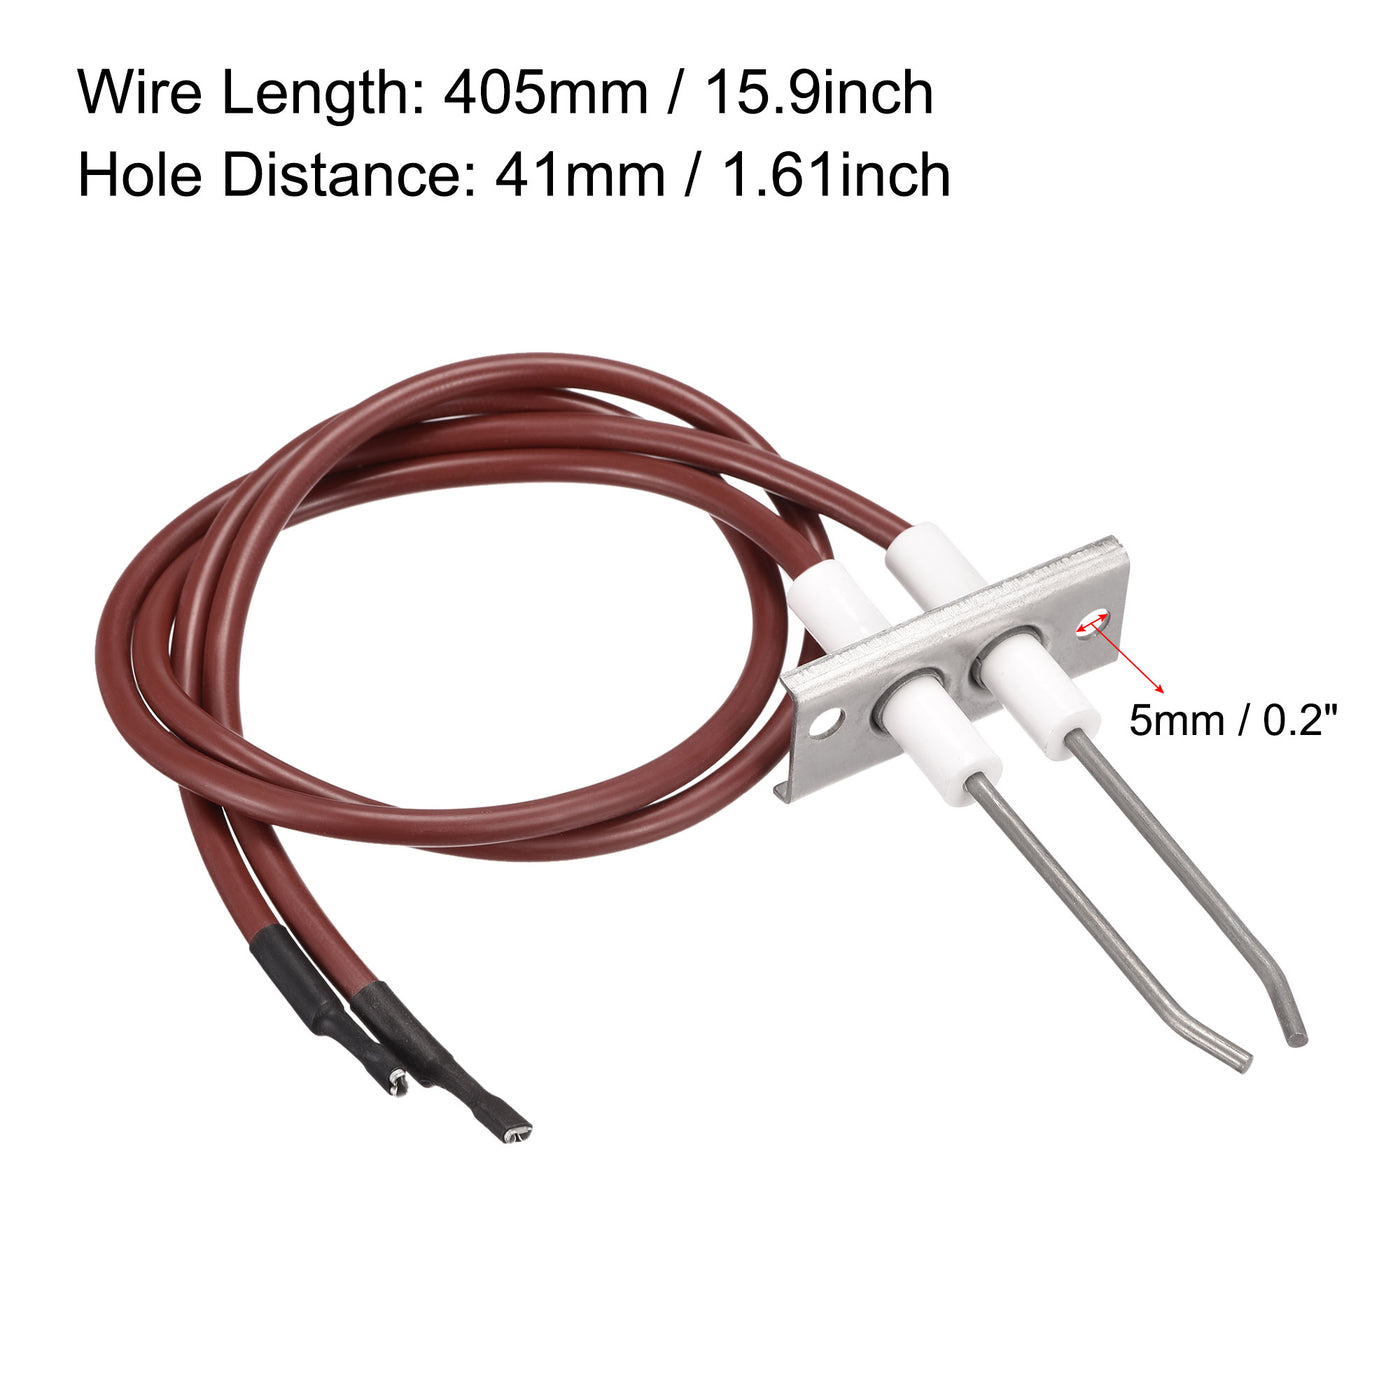 uxcell Uxcell Ignitor Wire Ceramic Electrode Assembly 405mm Length Gas Grill Ignitor Wire Ignition Electrode Replacement